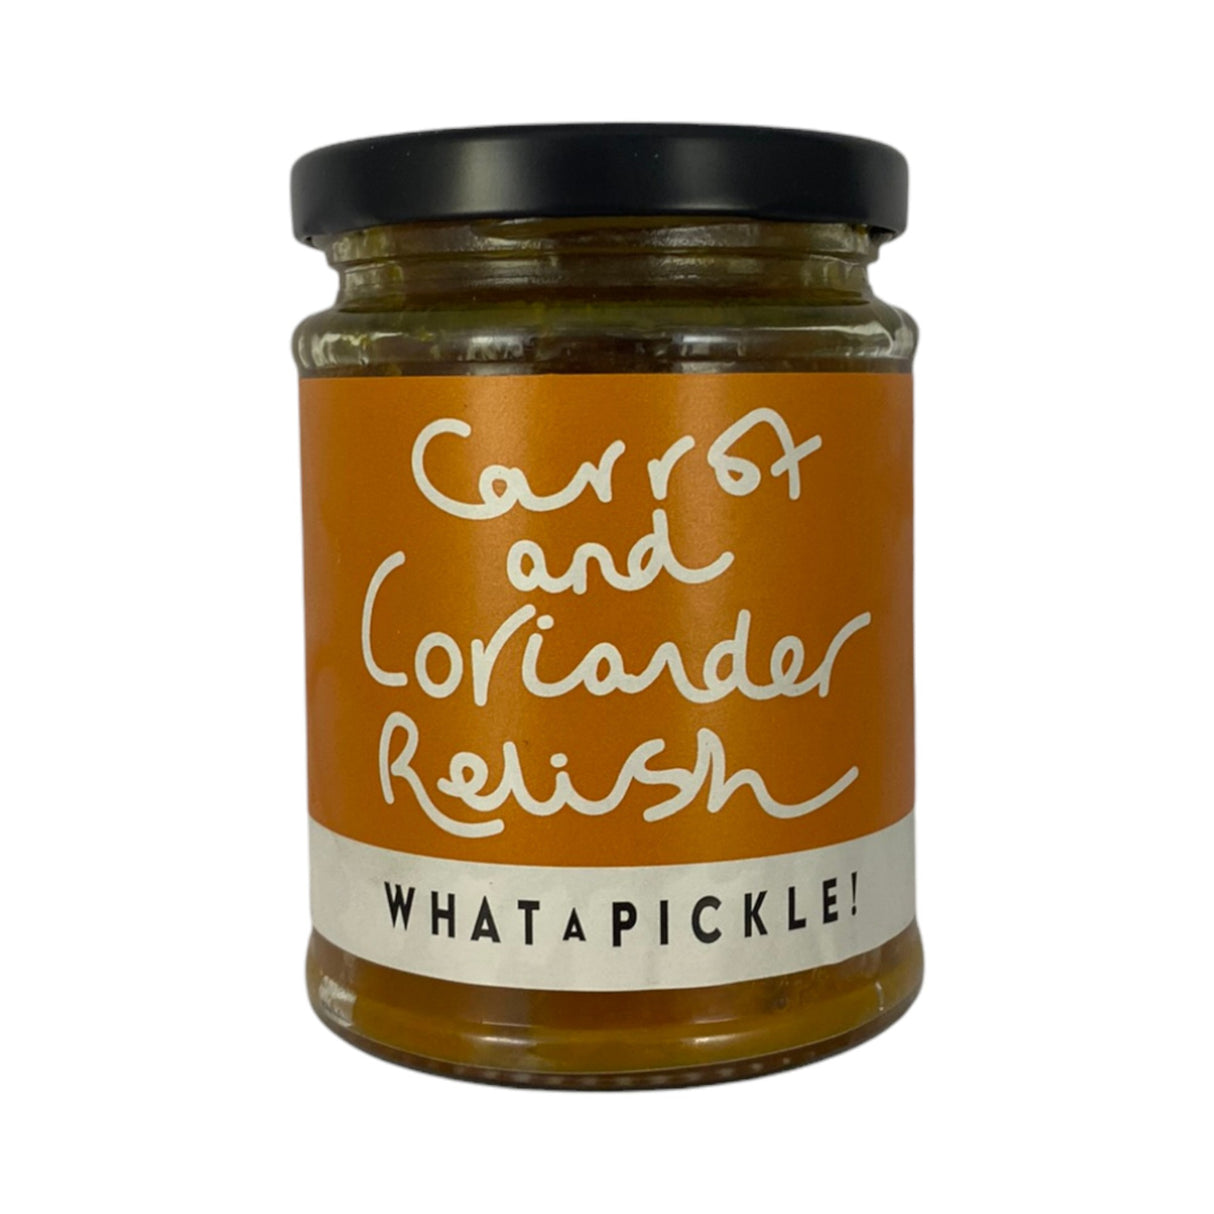 What a Pickle! - Carrot & Coriander Relish 270g